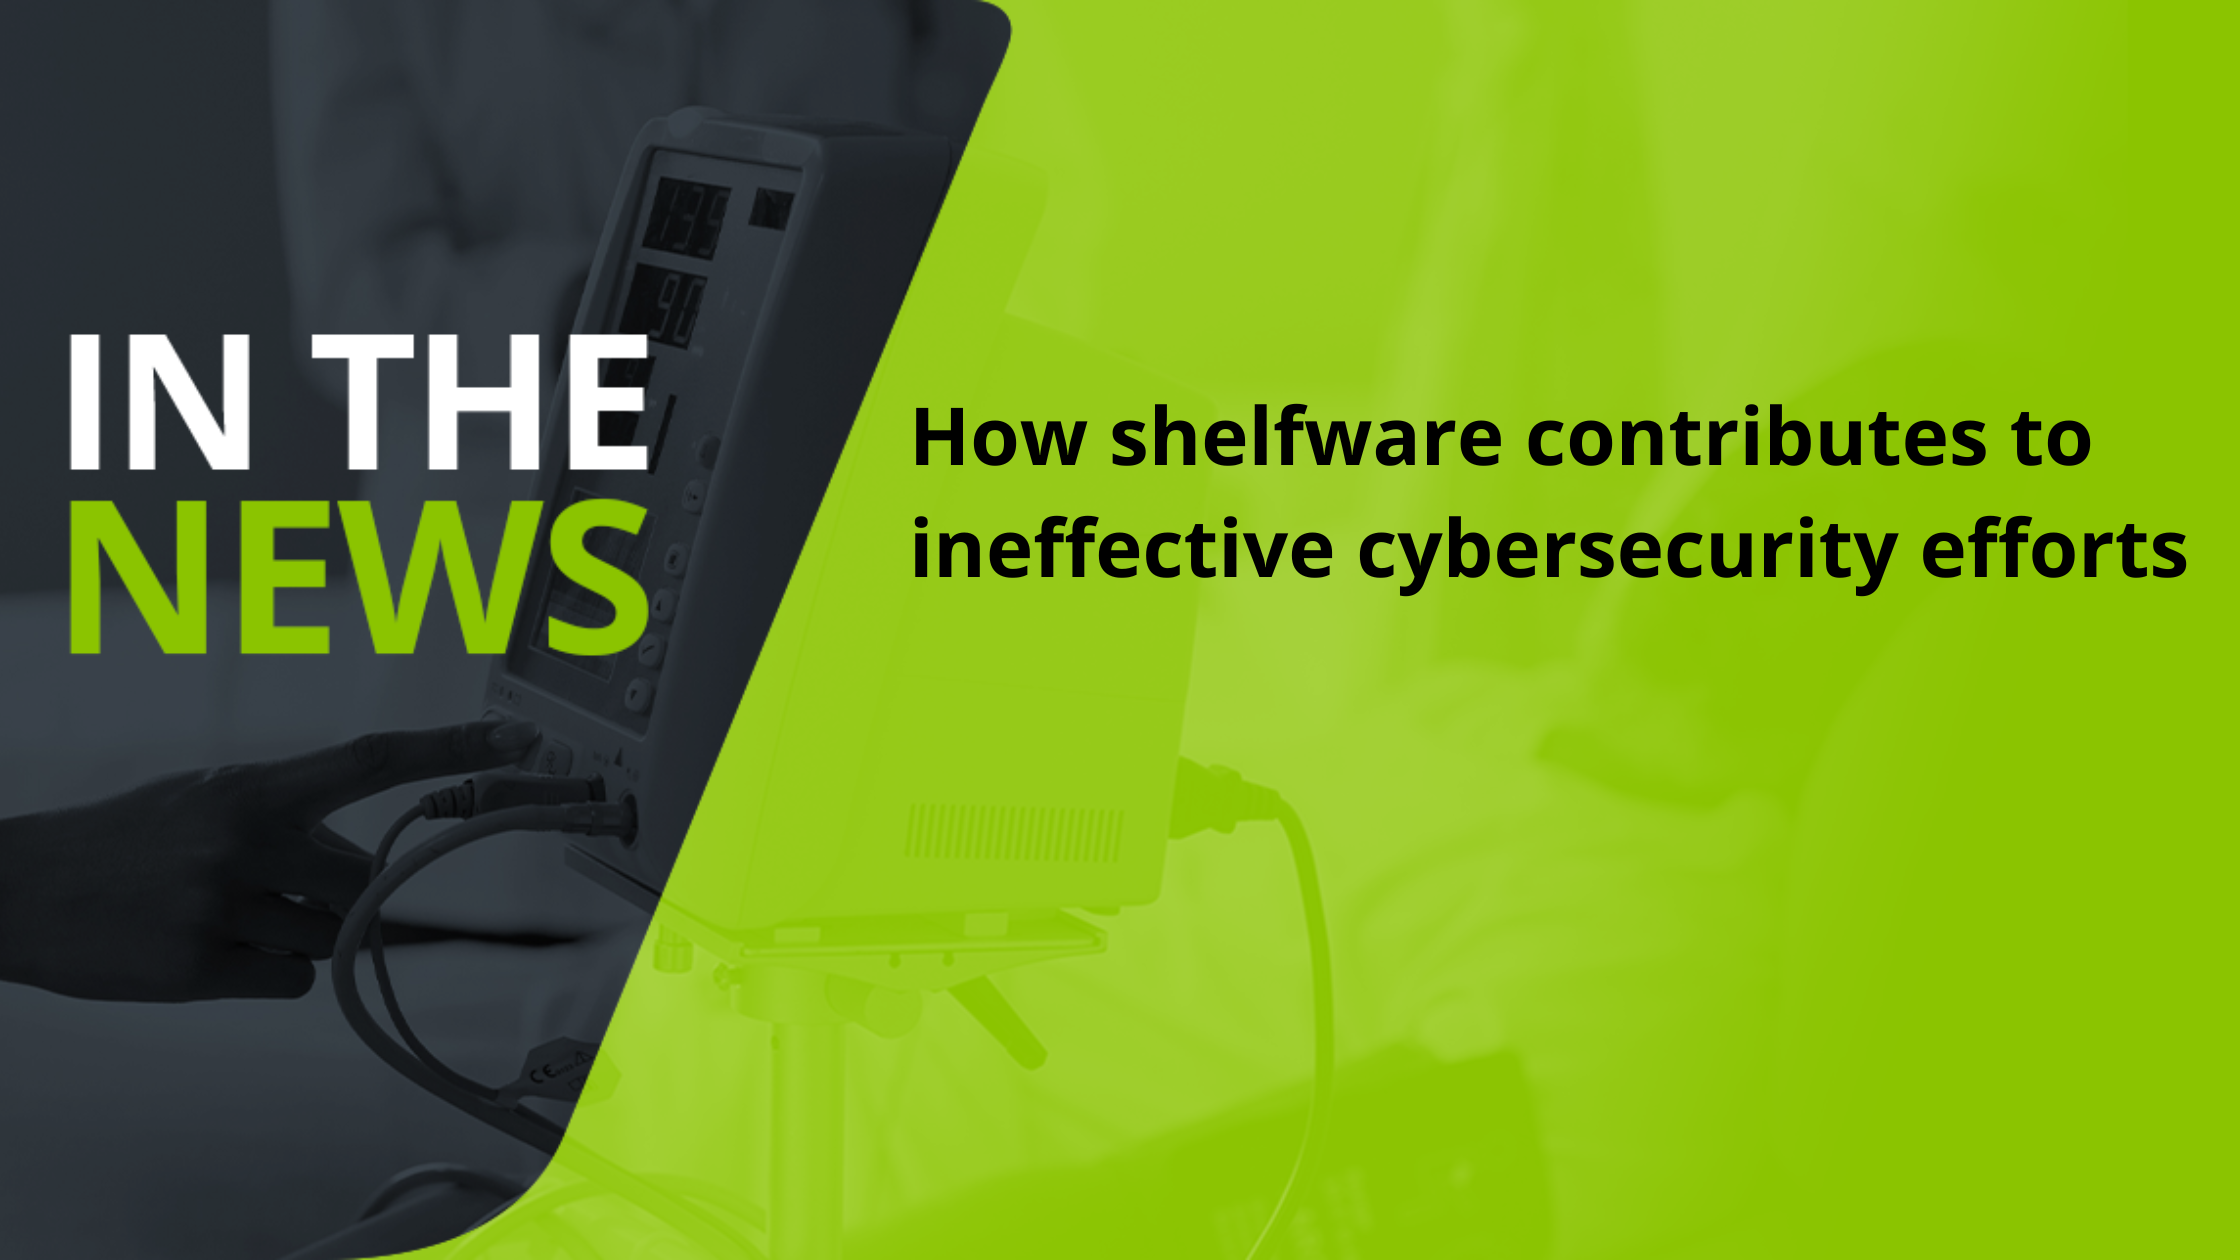 Vigilor in the news - How shelfware contributes to ineffective cybersecurity efforts